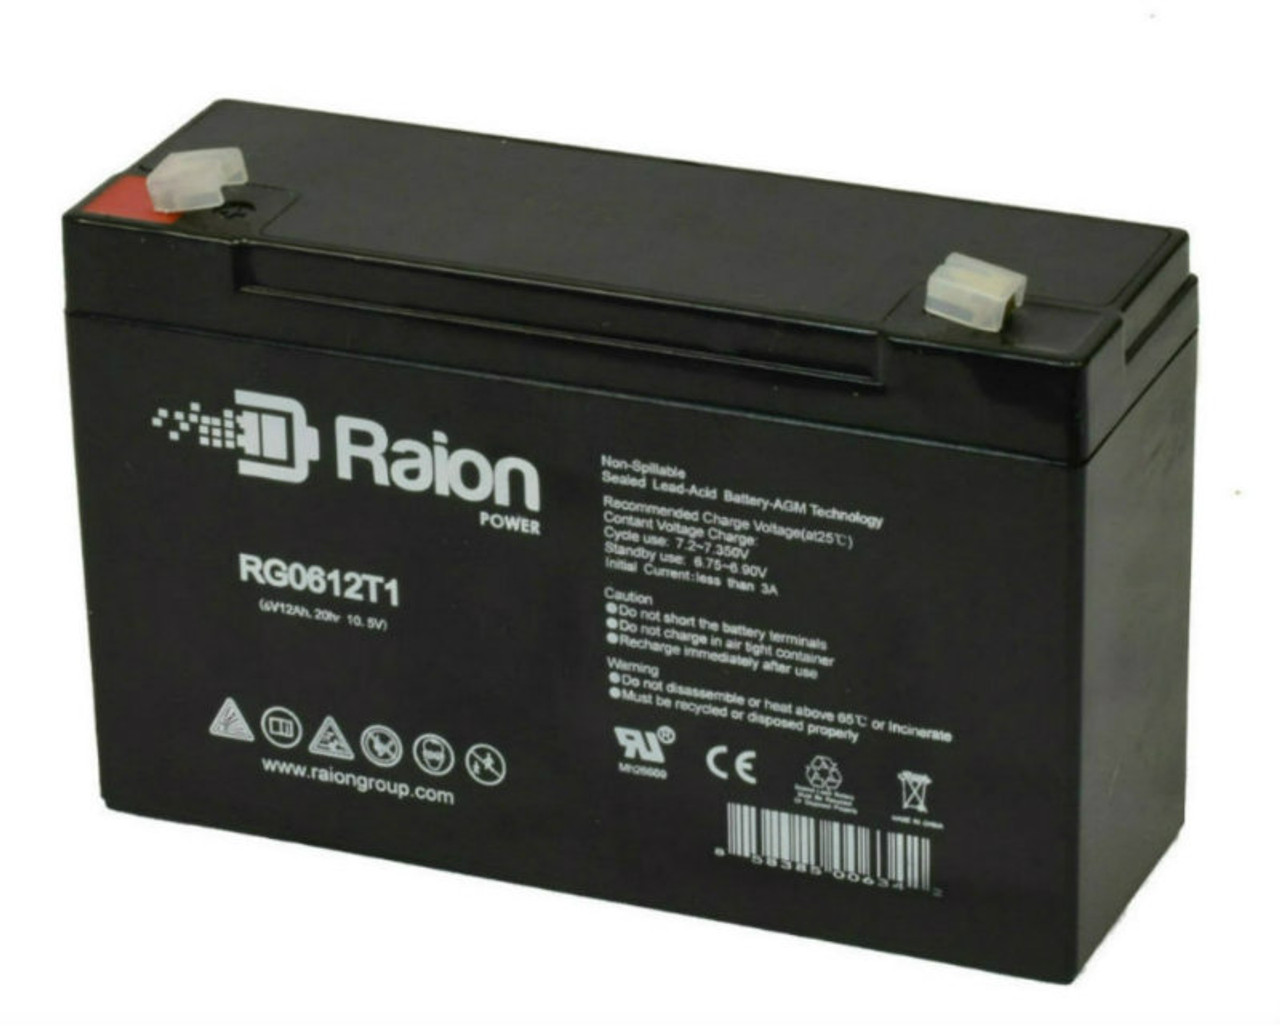 Raion Power RG06120T1 Replacement Battery for Sure-way 1007